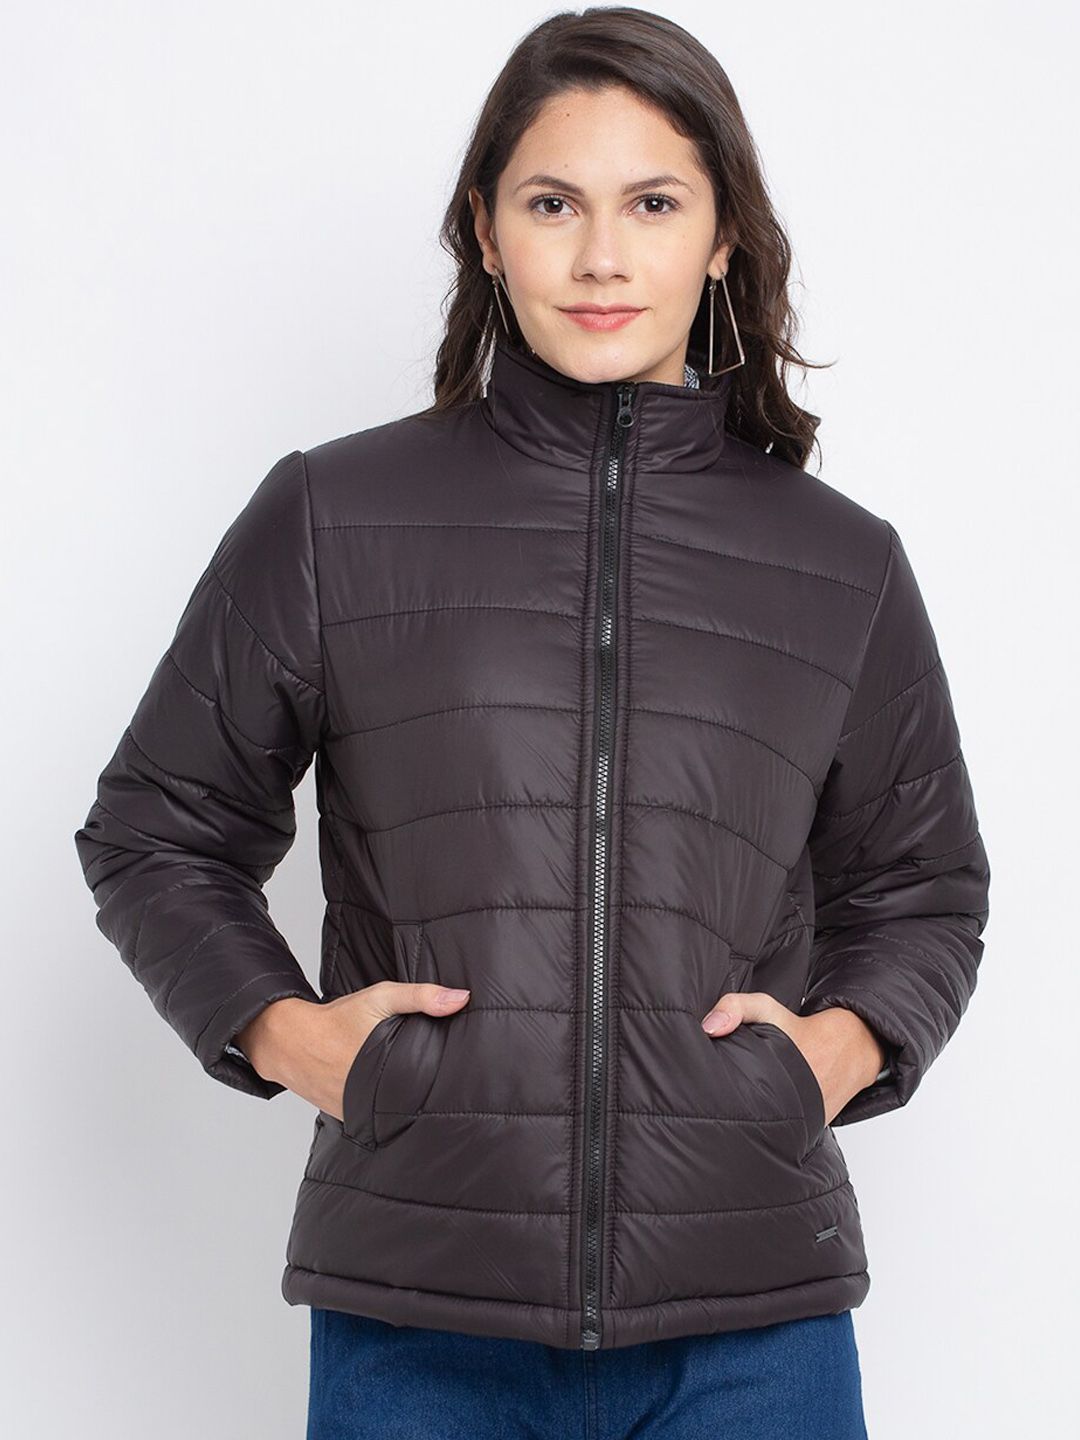 PERFKT-U Women Black Lightweight Antimicrobial Padded Jacket Price in India